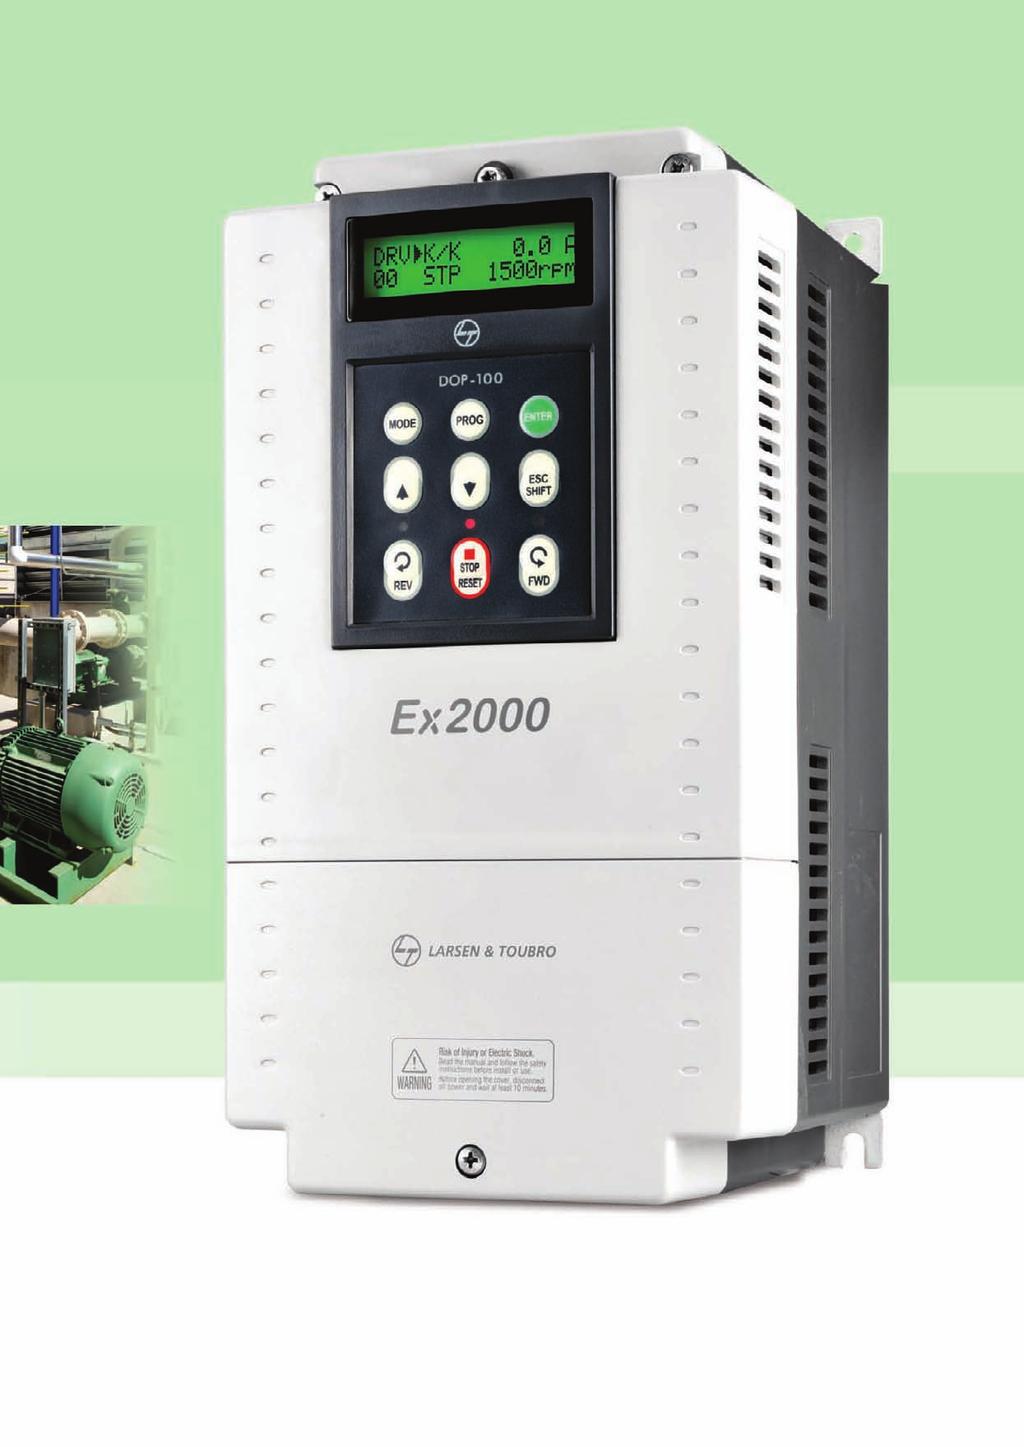 Specially designed for industrial applications, the Ex2000 is perfectly suited for fan and pump applications.